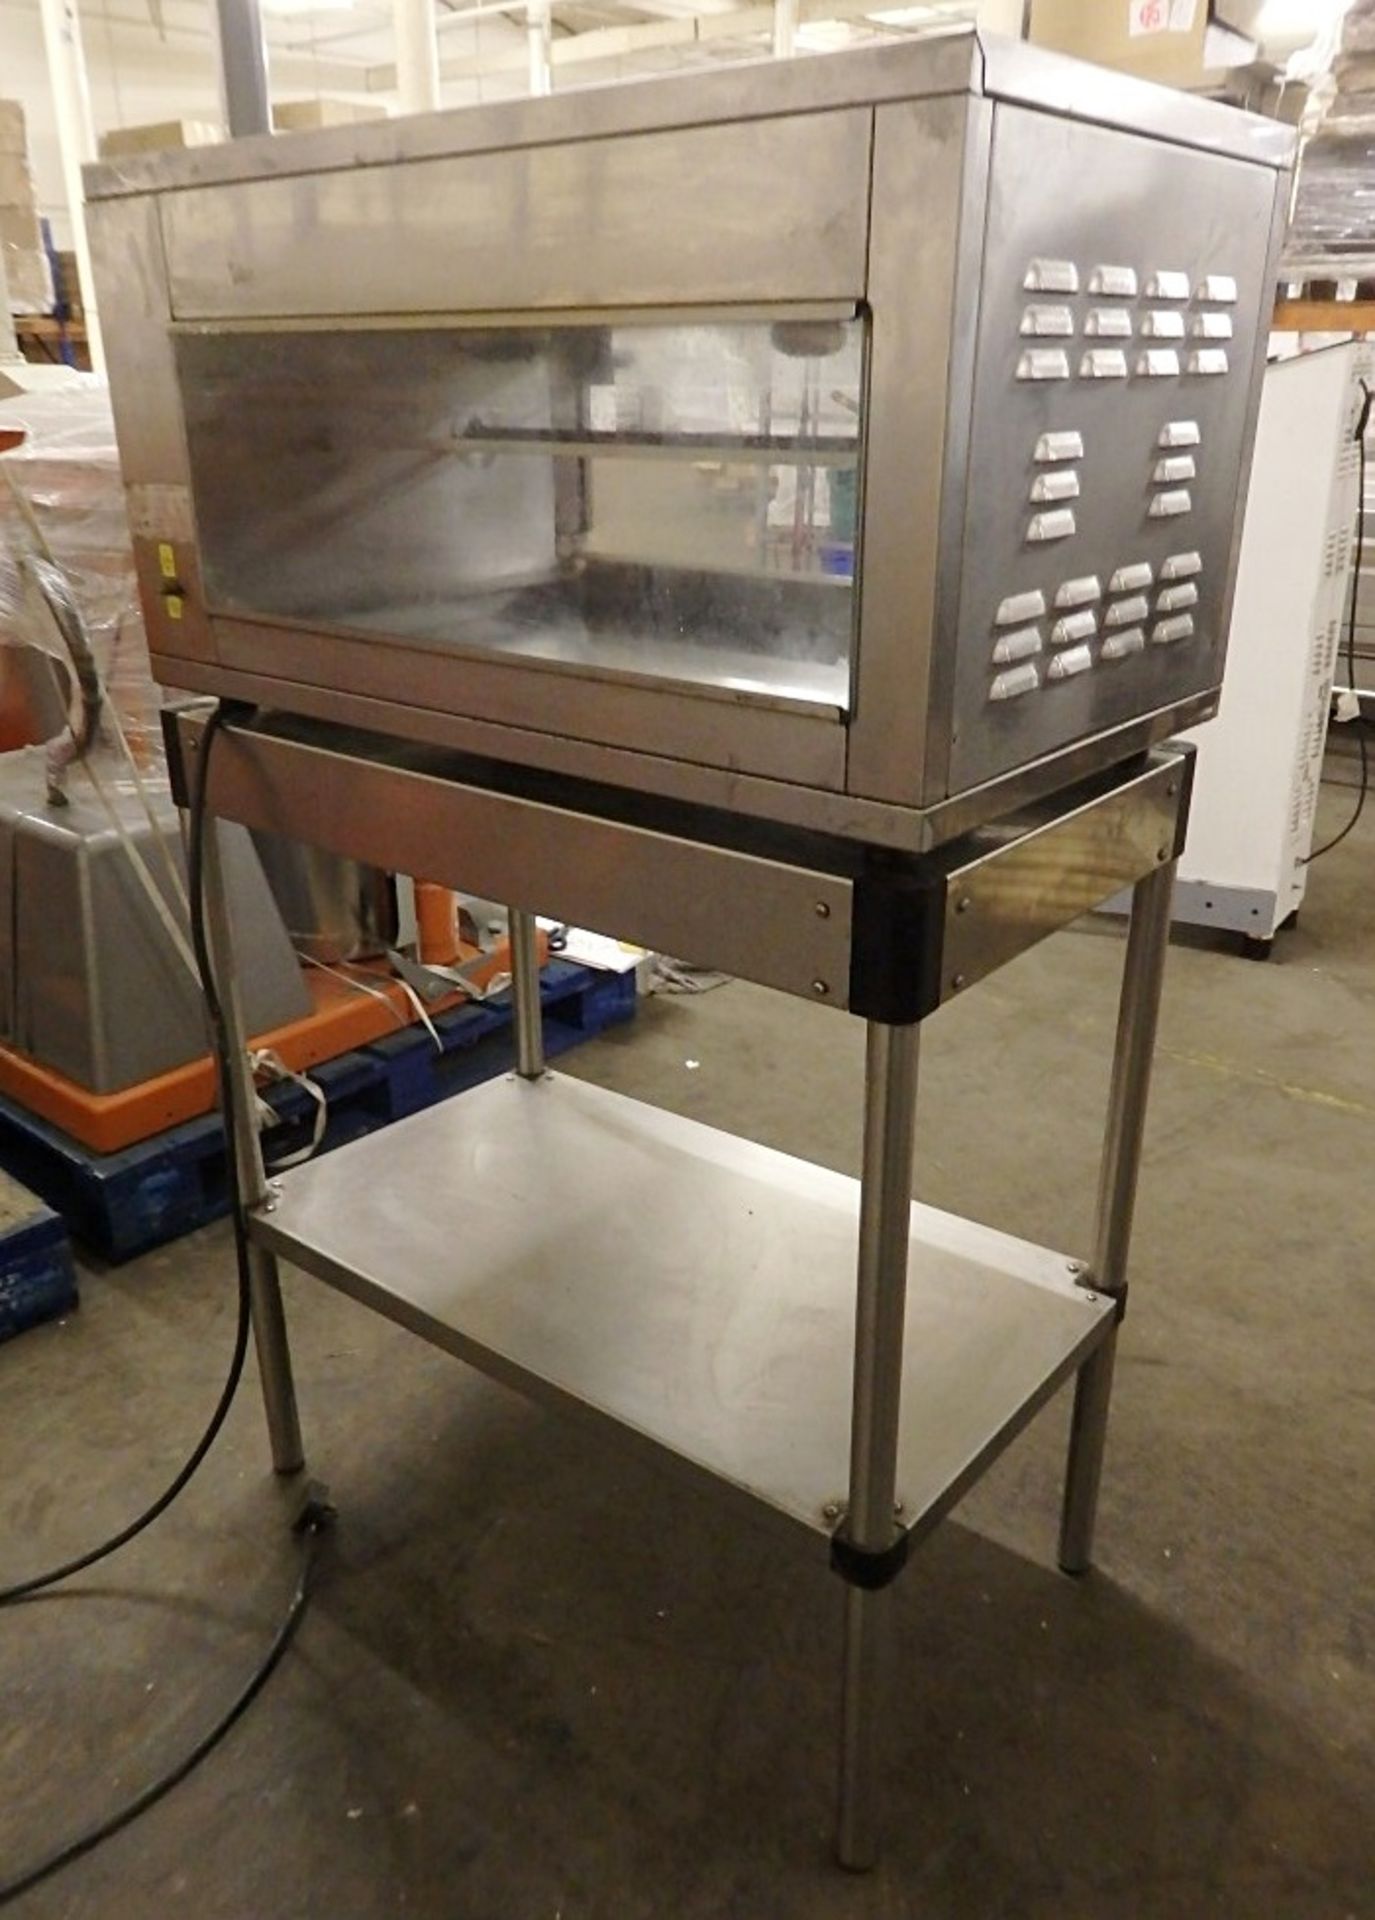 1 x Rotisserie Oven And Stand Reserve - Dimensions; Oven W90 x D56 x H47 (H137 Inc. Stand) Ref: M073 - Image 5 of 6